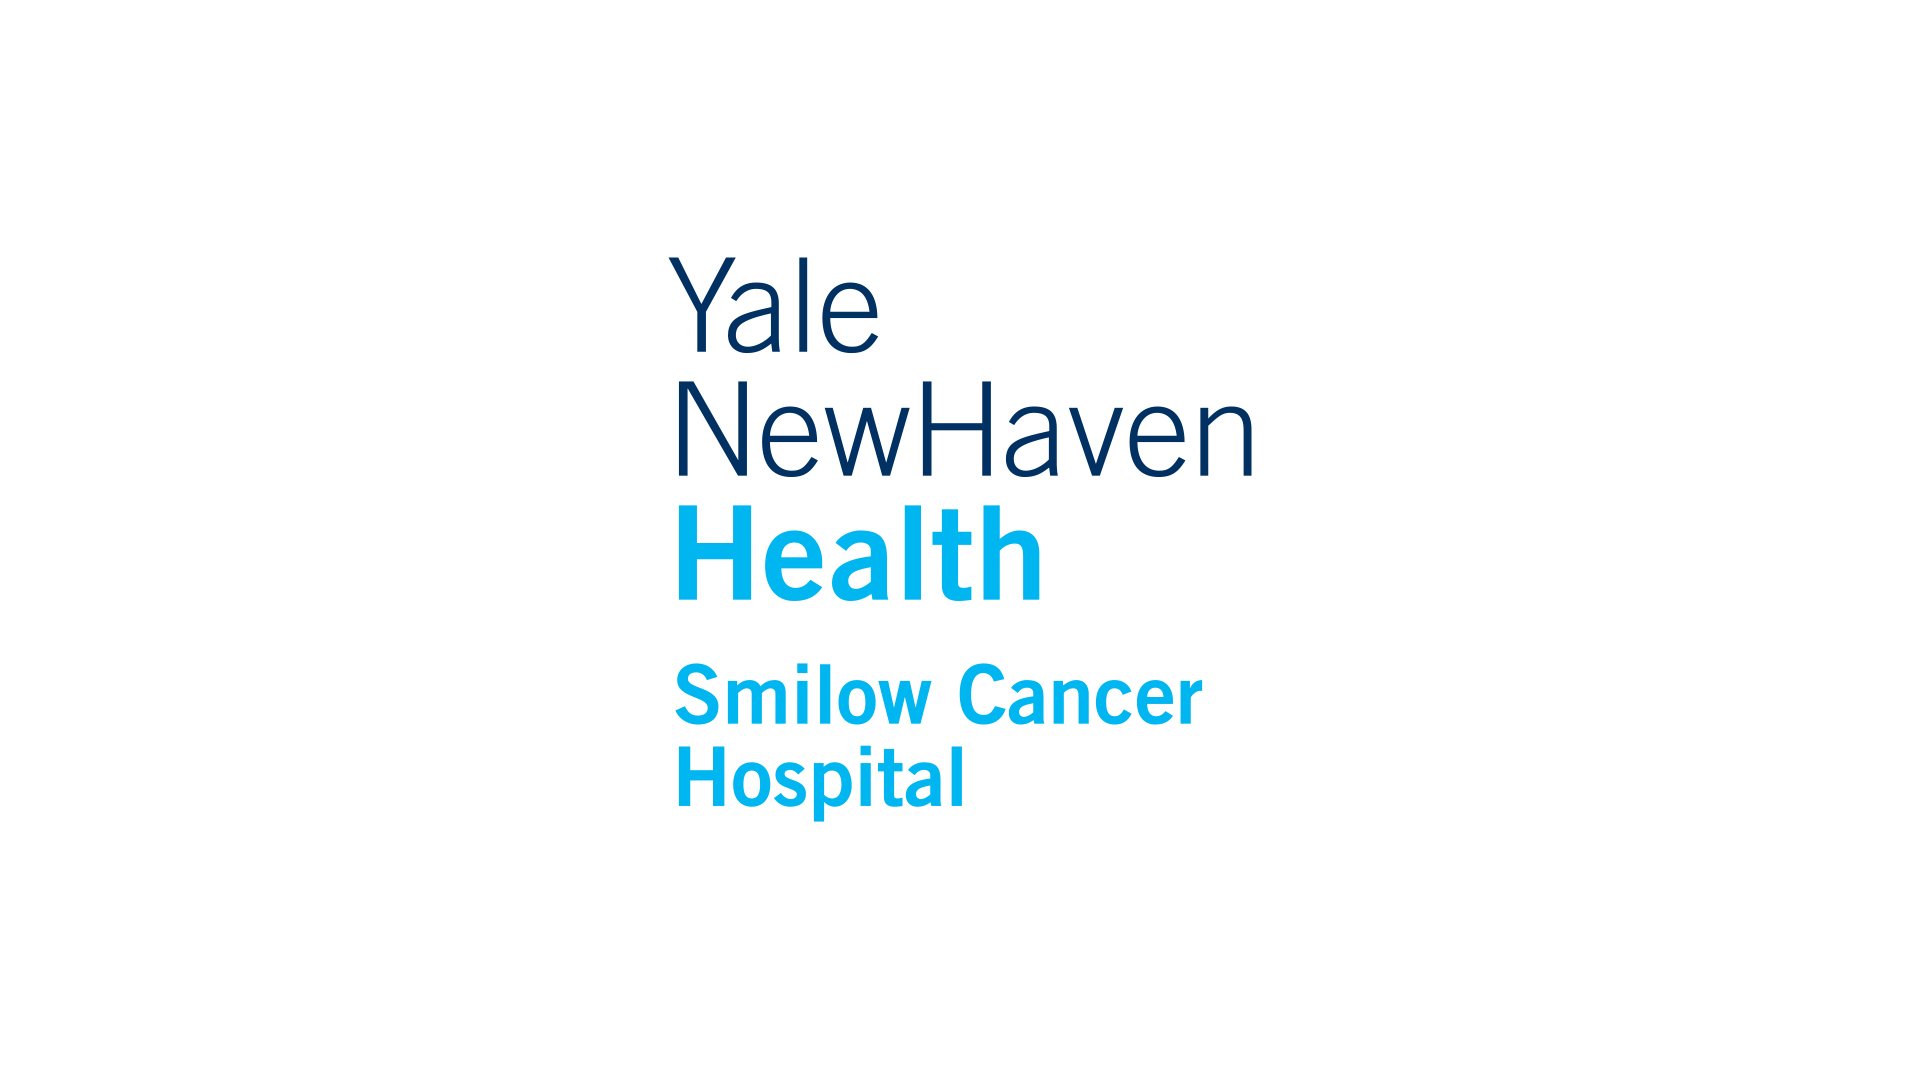 Smilow Cancer Hospital in New Haven